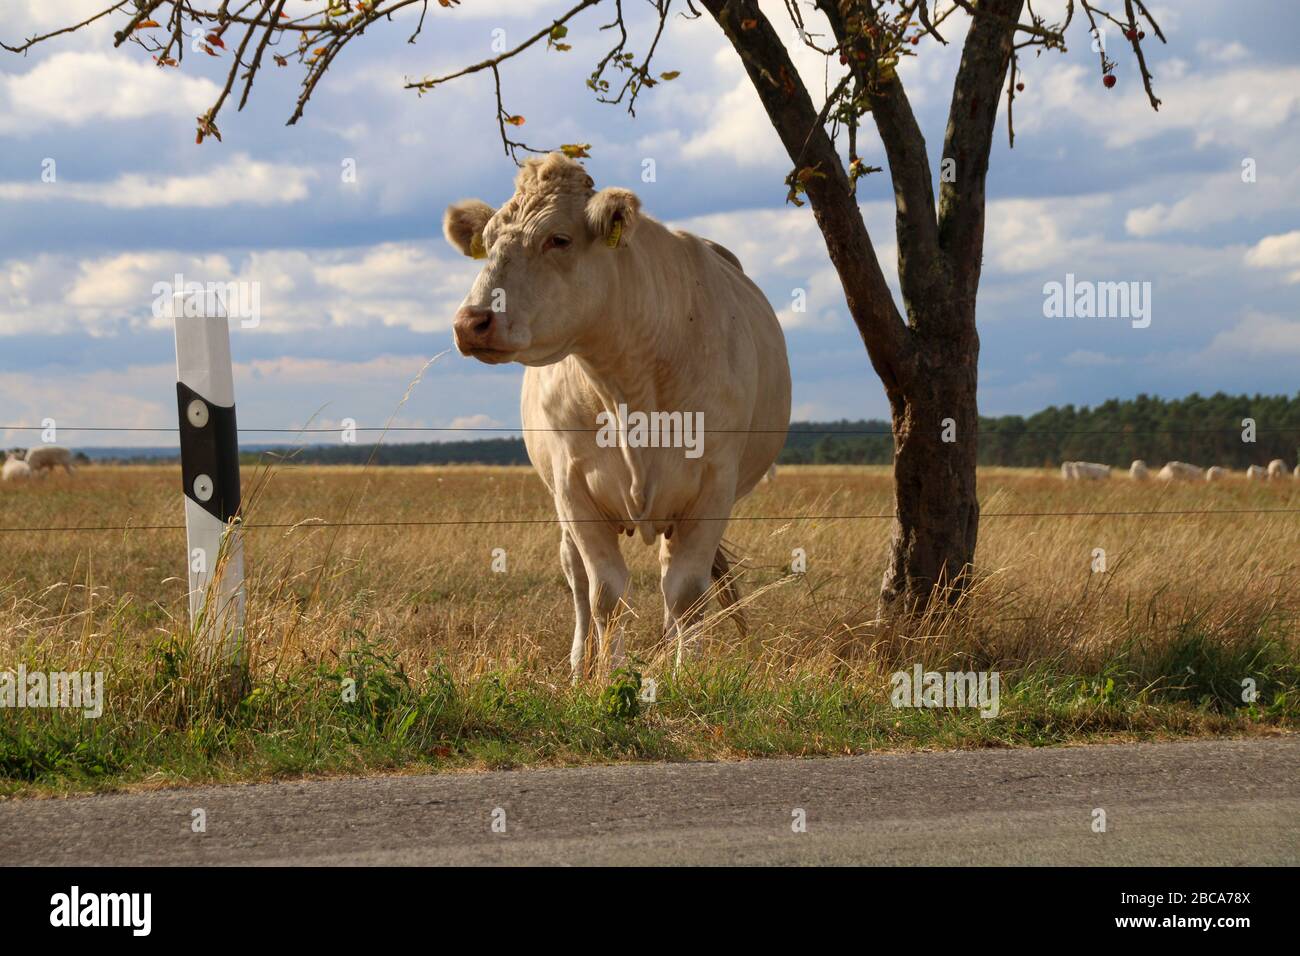 A cow watches the traffic on a country road Stock Photo